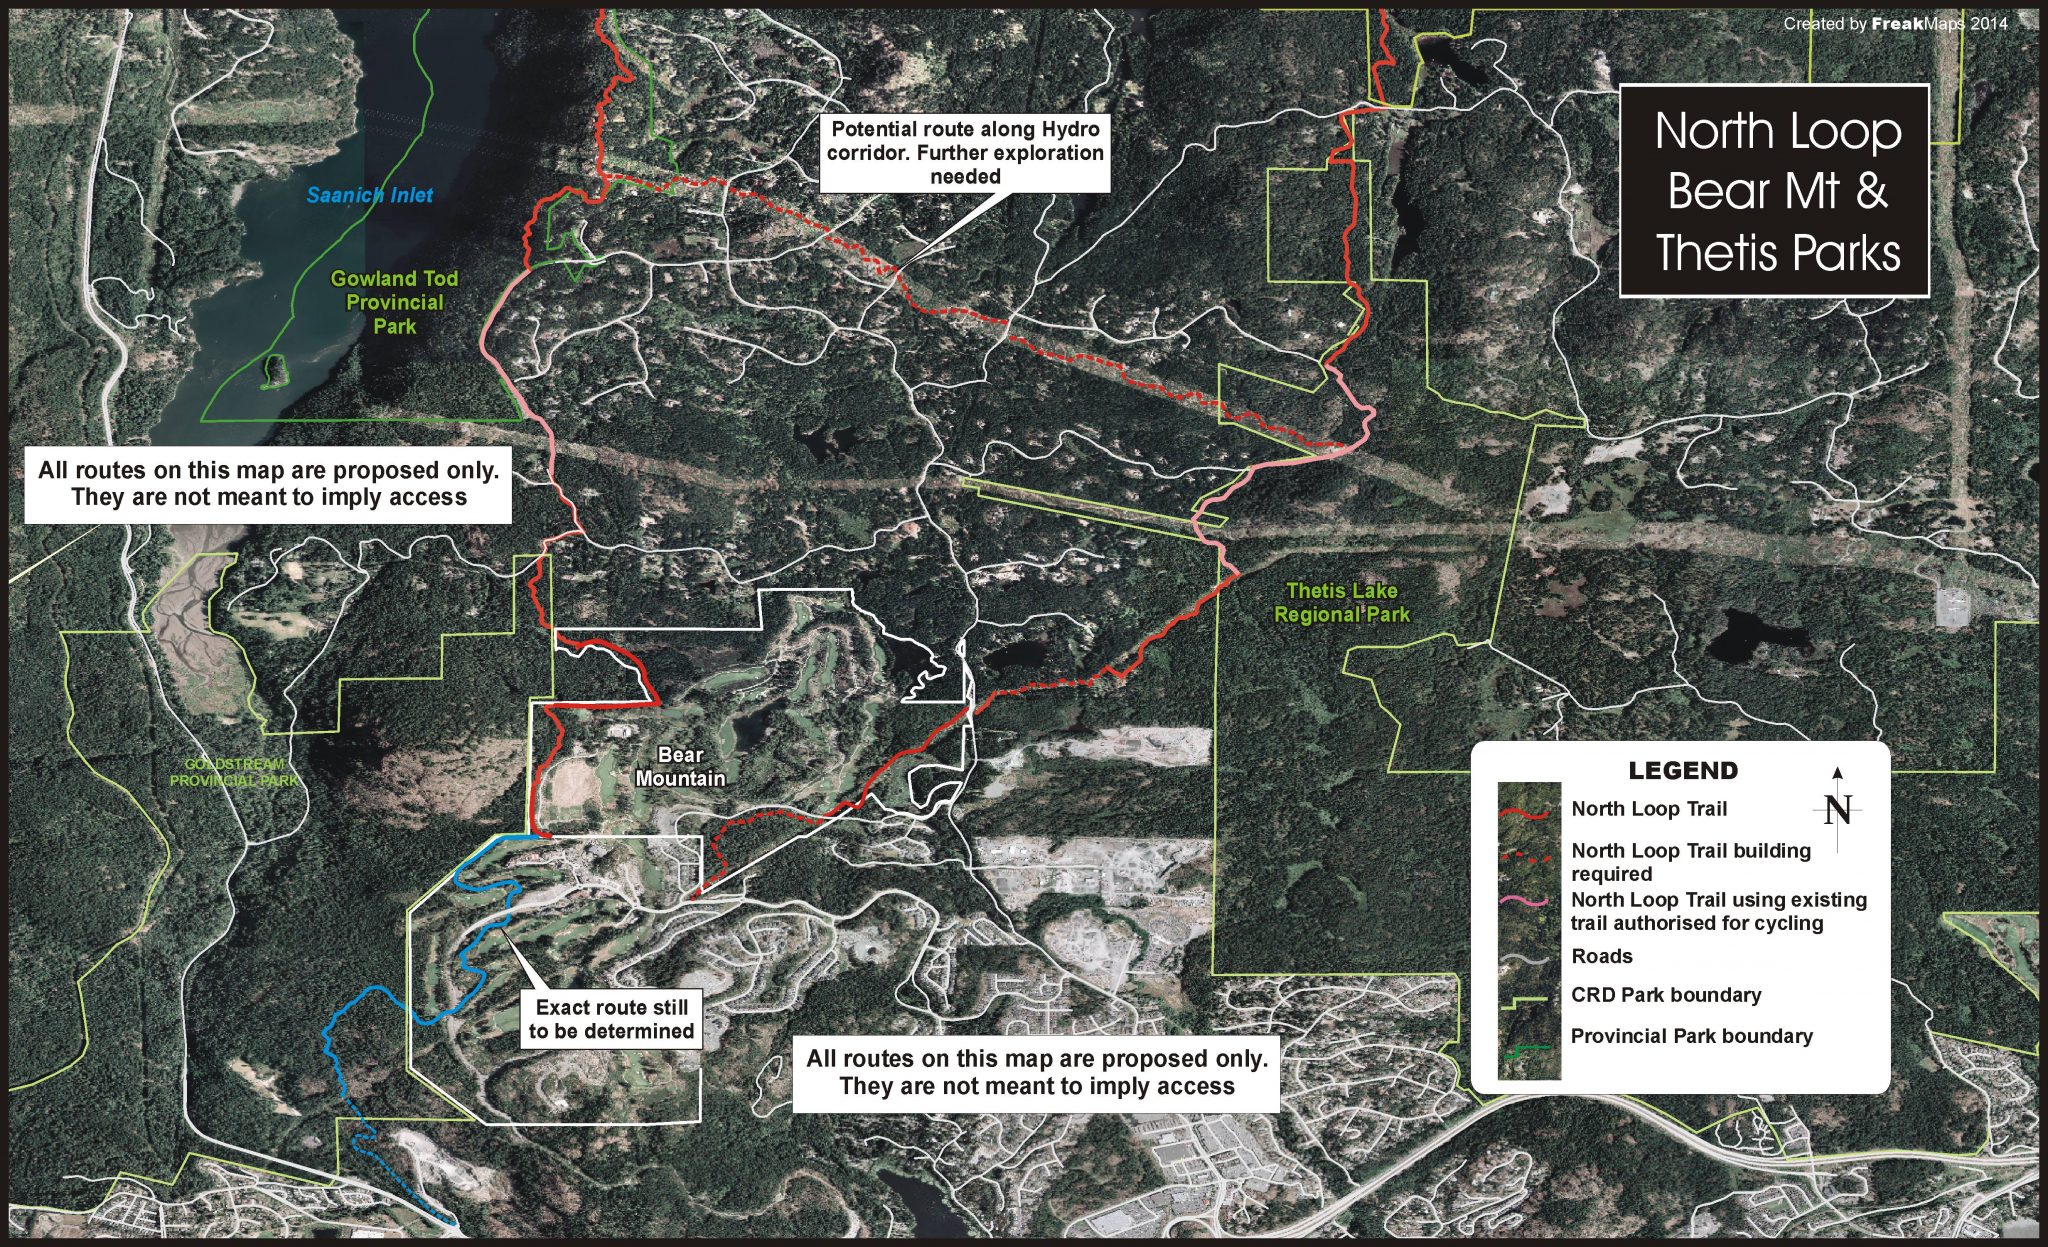 The North Loop and Thetis Lake Regional Park